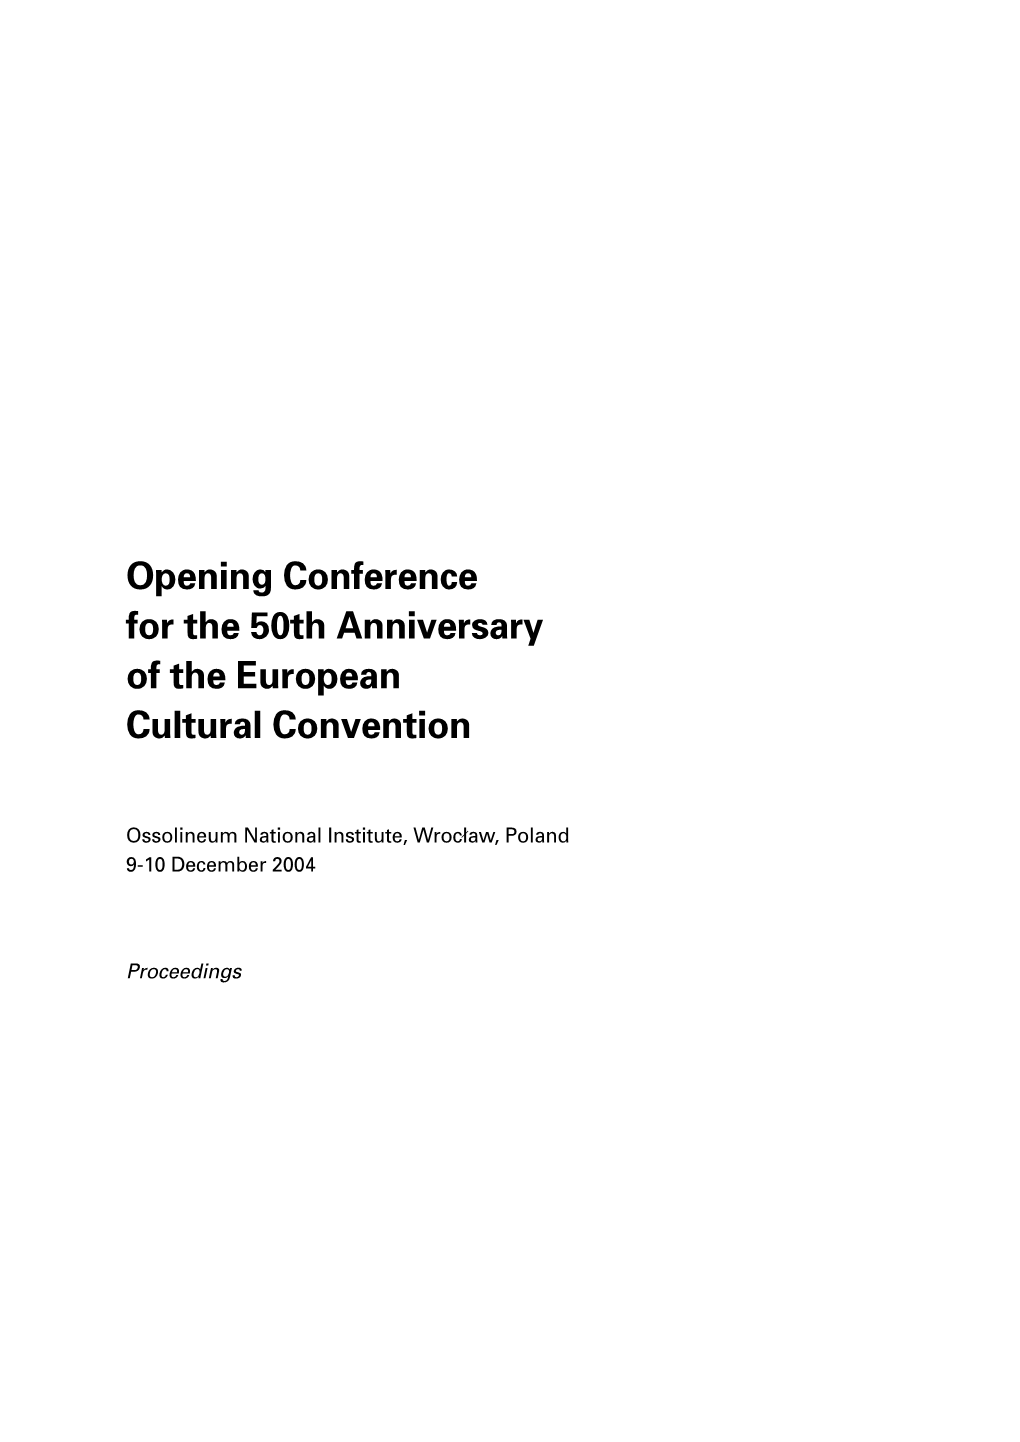 Opening Conference for the 50Th Anniversary of the European Cultural Convention